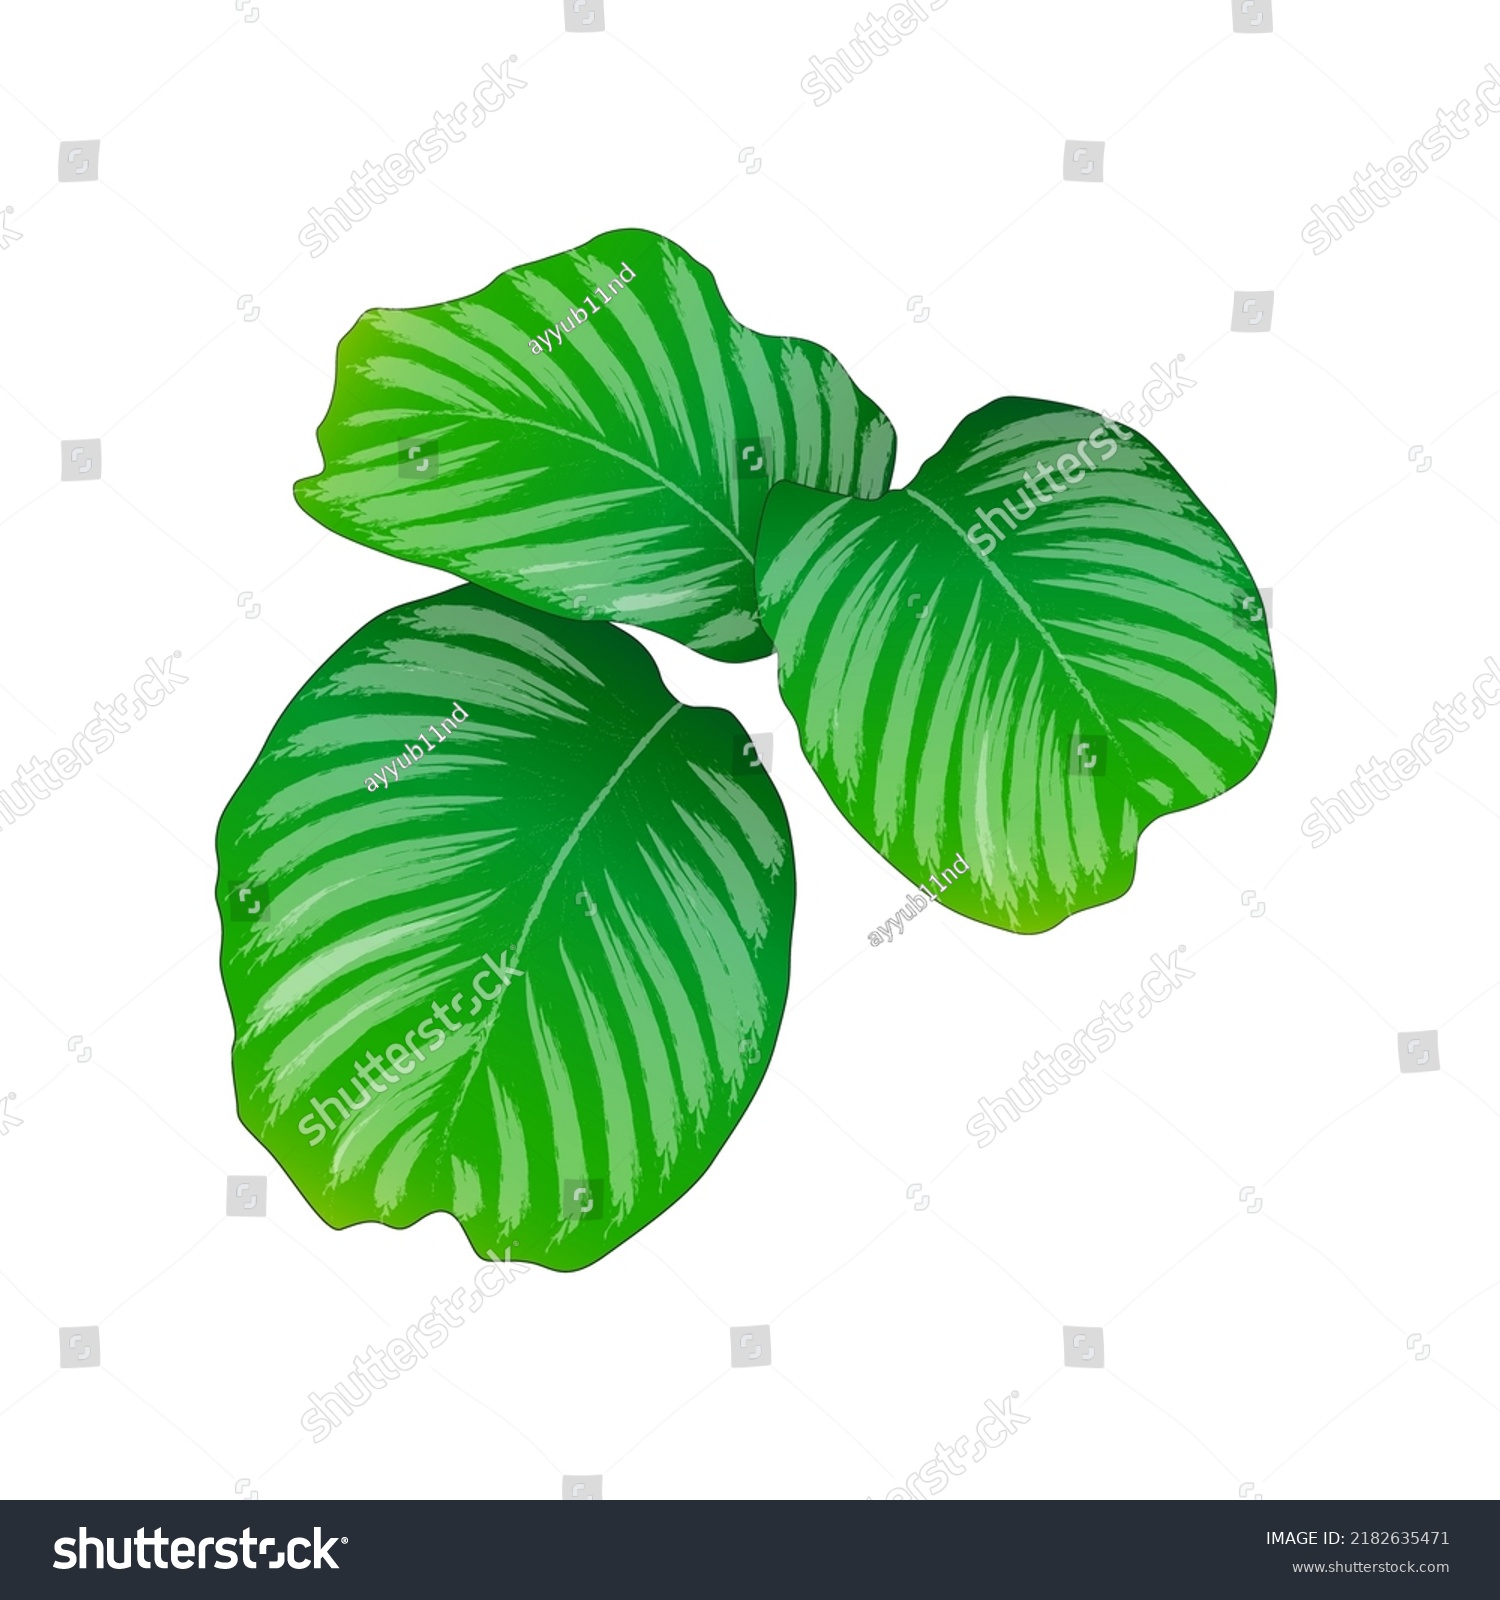 calathea orbifolia with a predominance of green and white. orbifolia is identical to its large leaves #2182635471